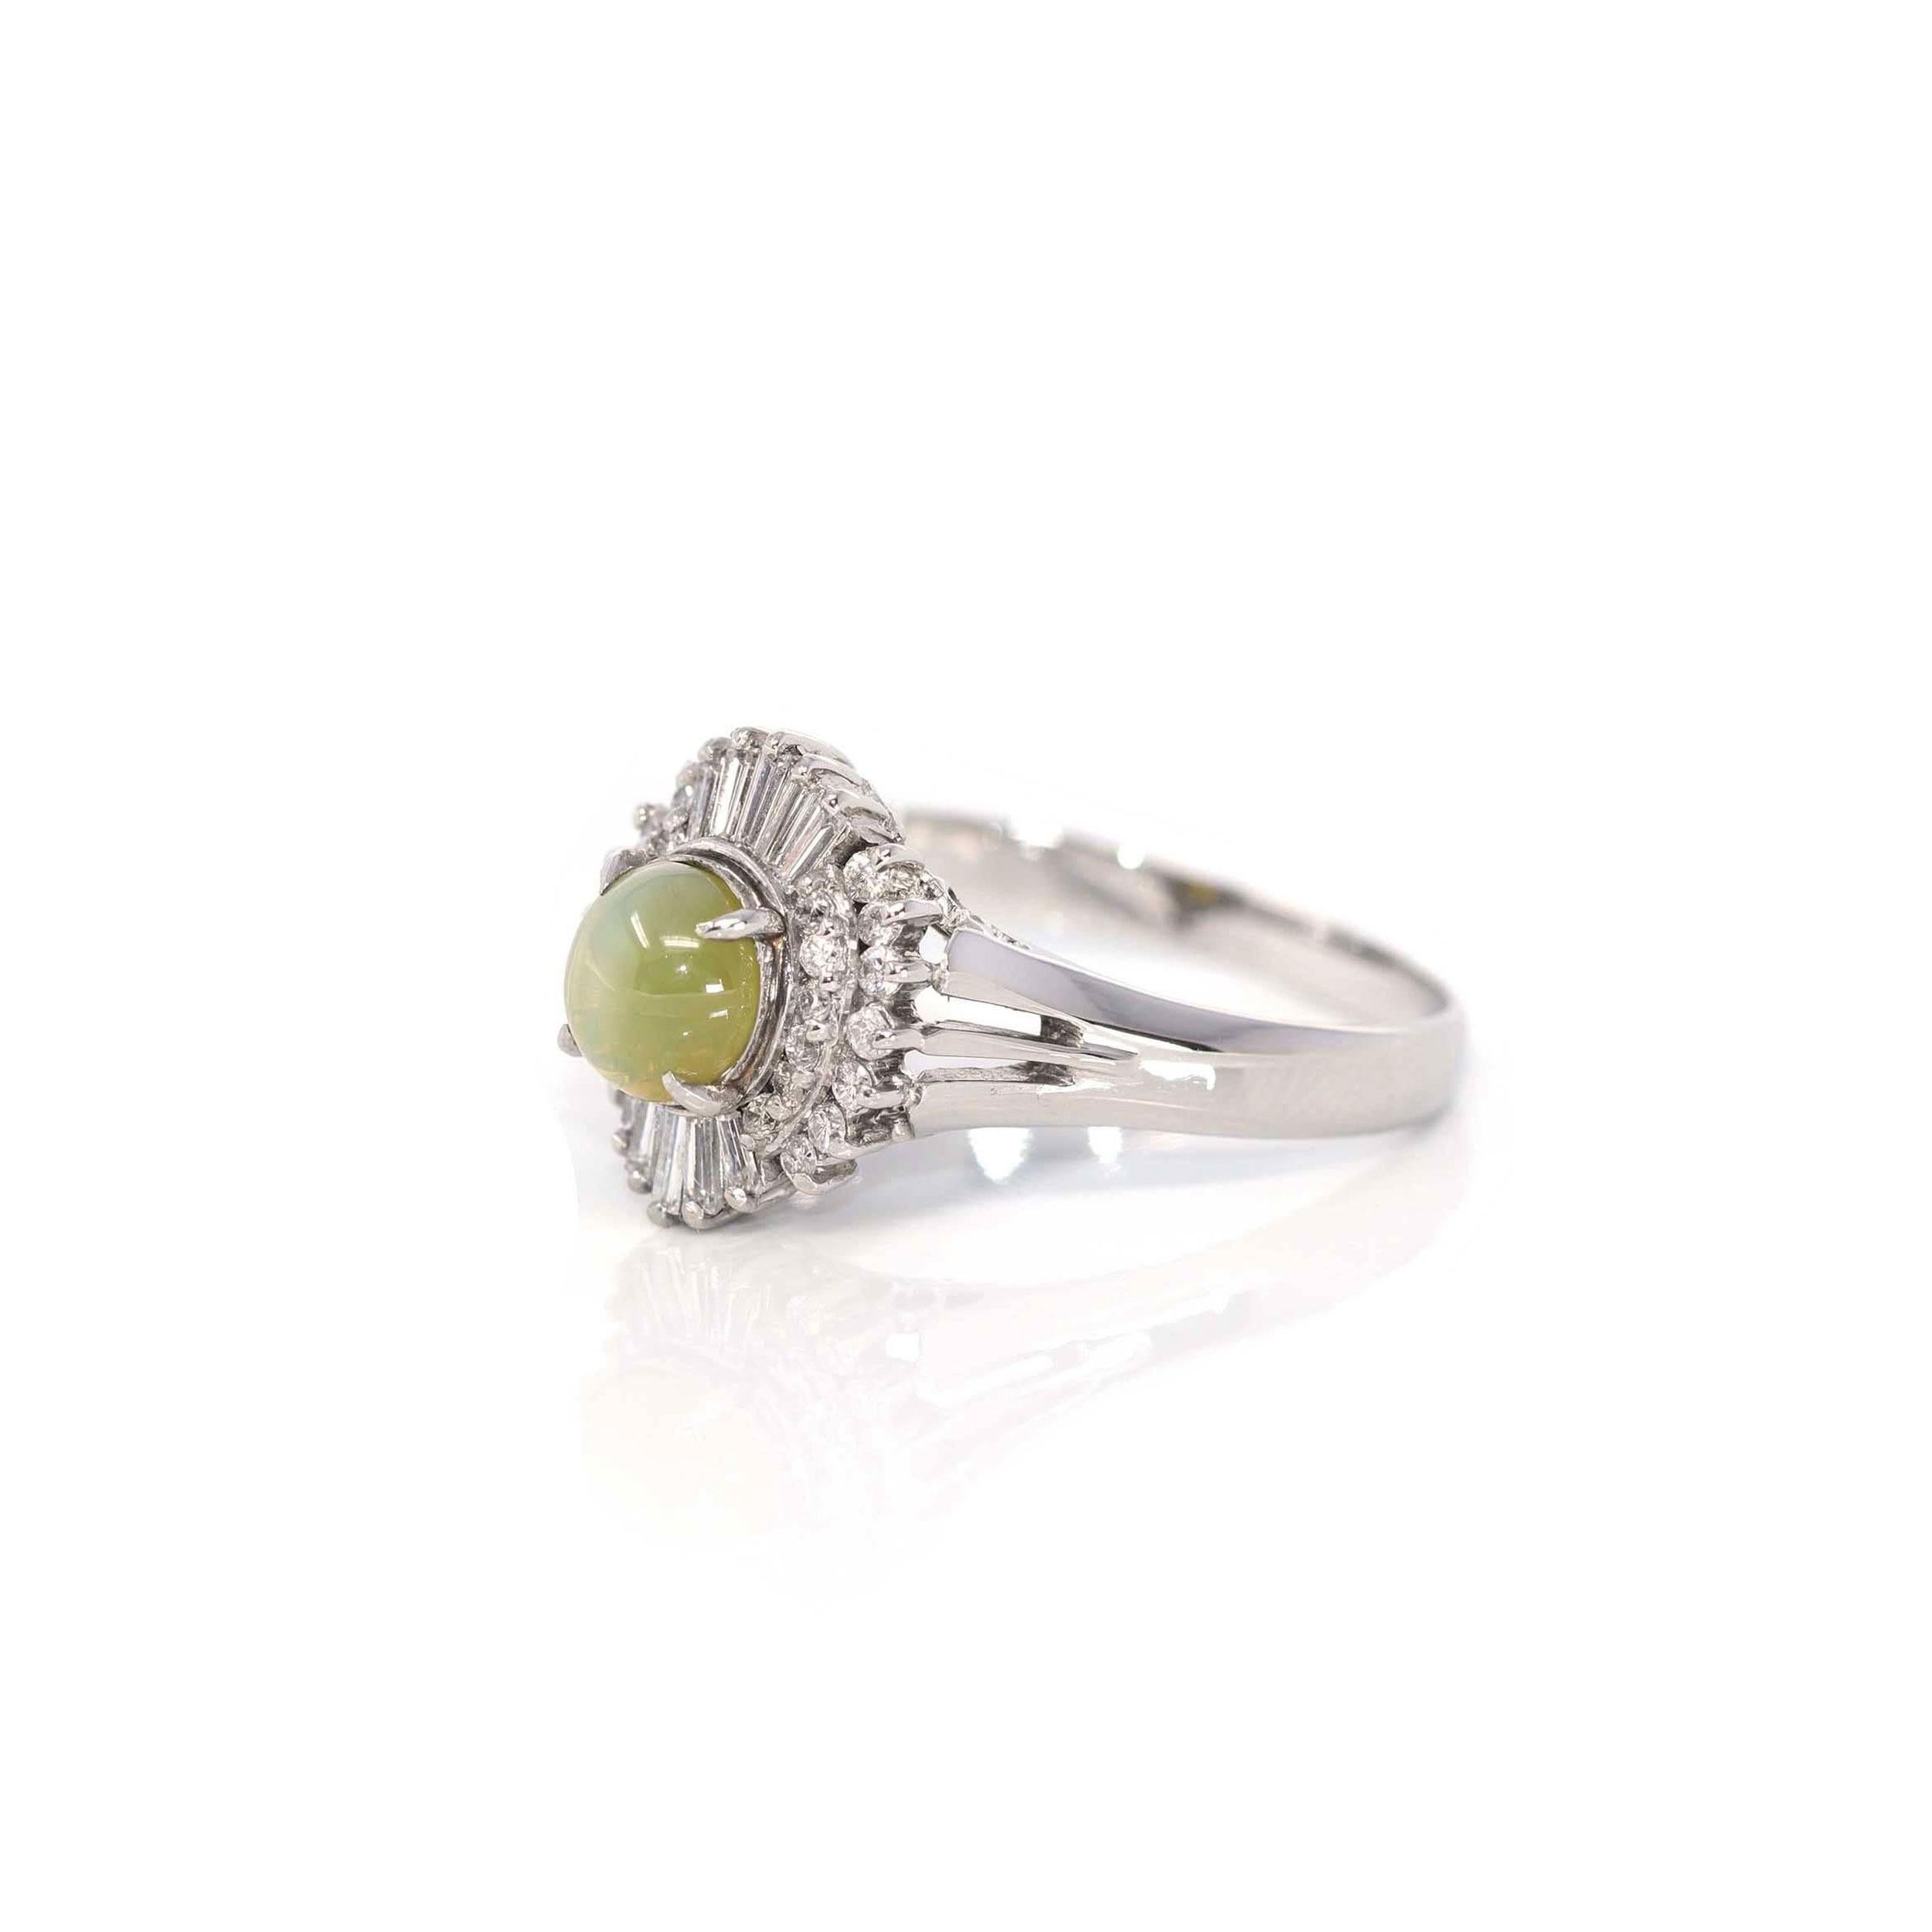 * Design Concept--- This ring features a natural chrysoberyl cat's eye as the center of attention. The design is simplistic yet elegant. The ring looks very exquisite with diamonds tracing the accents. Baikalla artisans are dedicated to combining